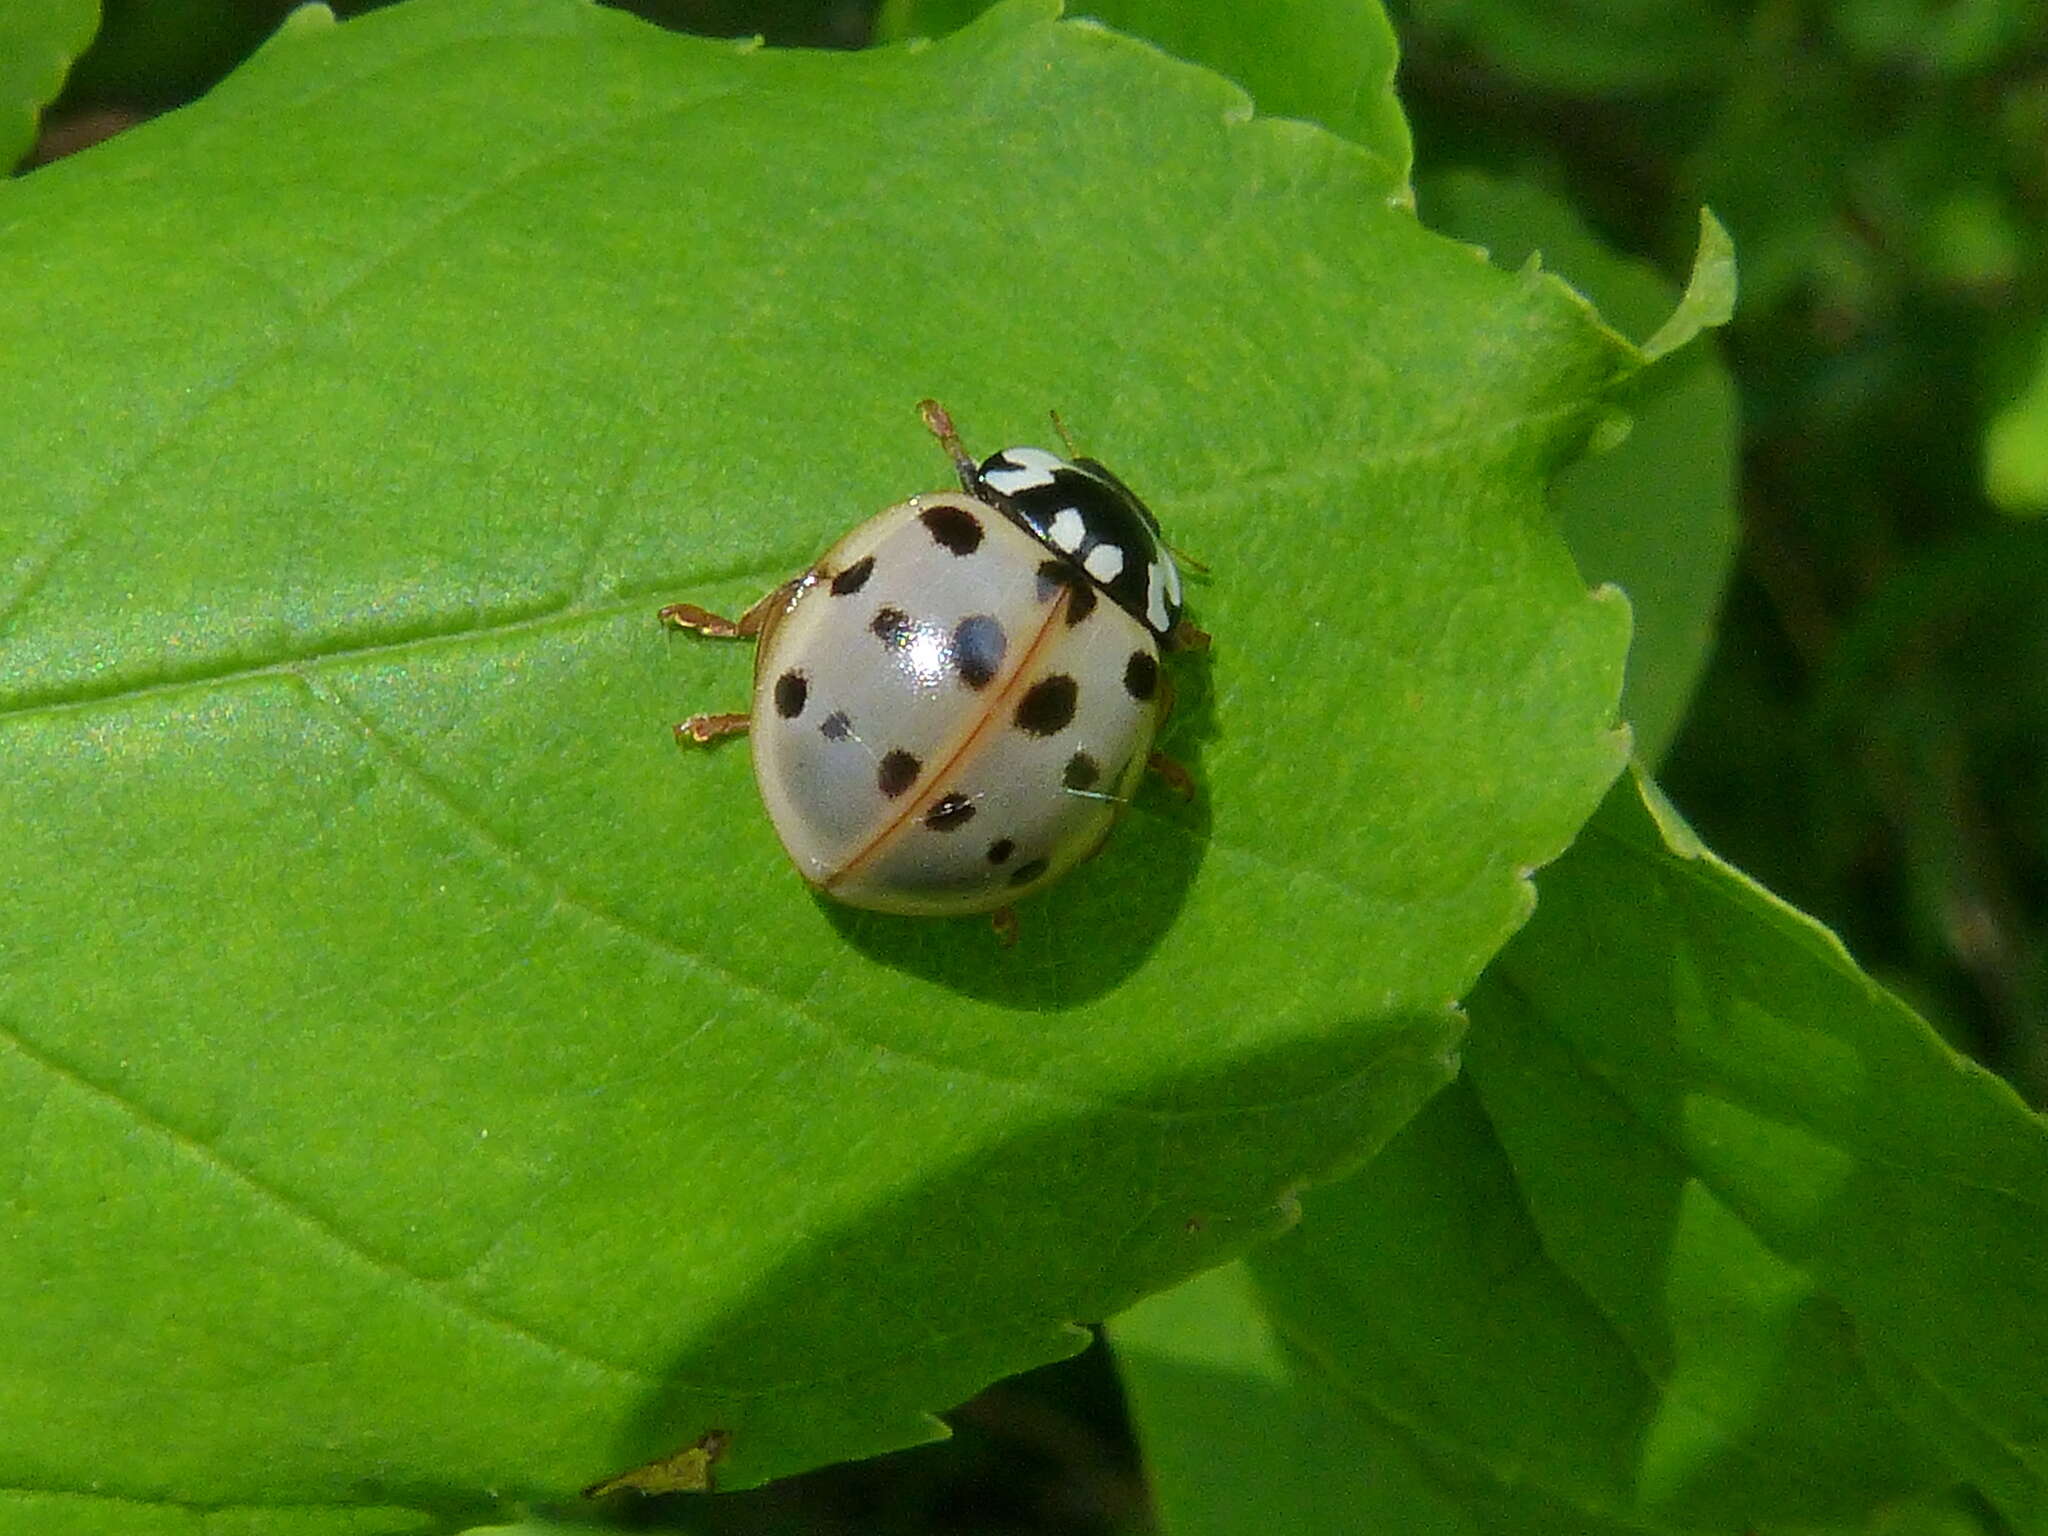 Image of Fifteen-spotted Lady Beetle